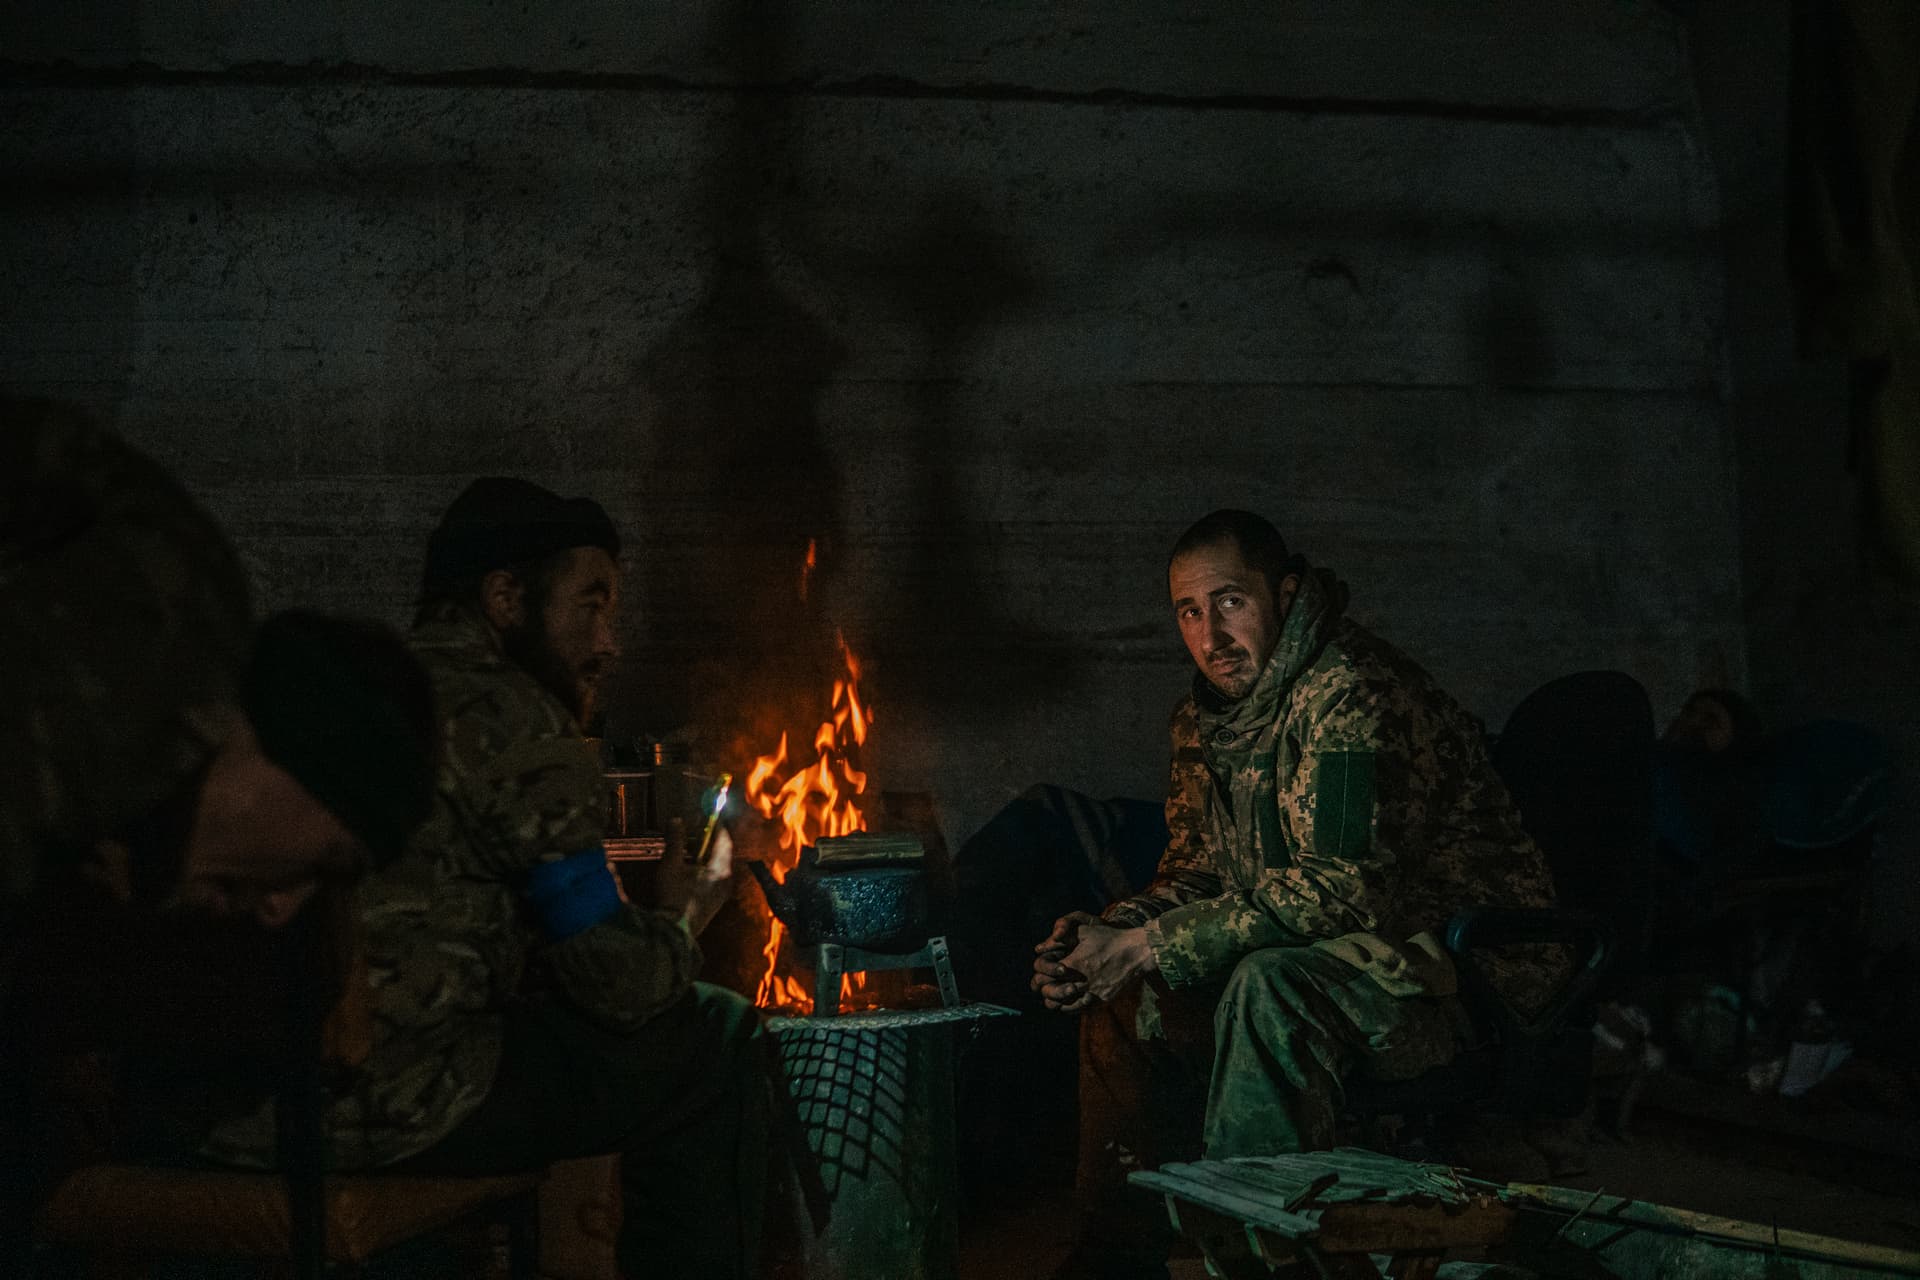 Ukrainian soldiers inside the ruined Azovstal steel plant in their shelter in Mariupol